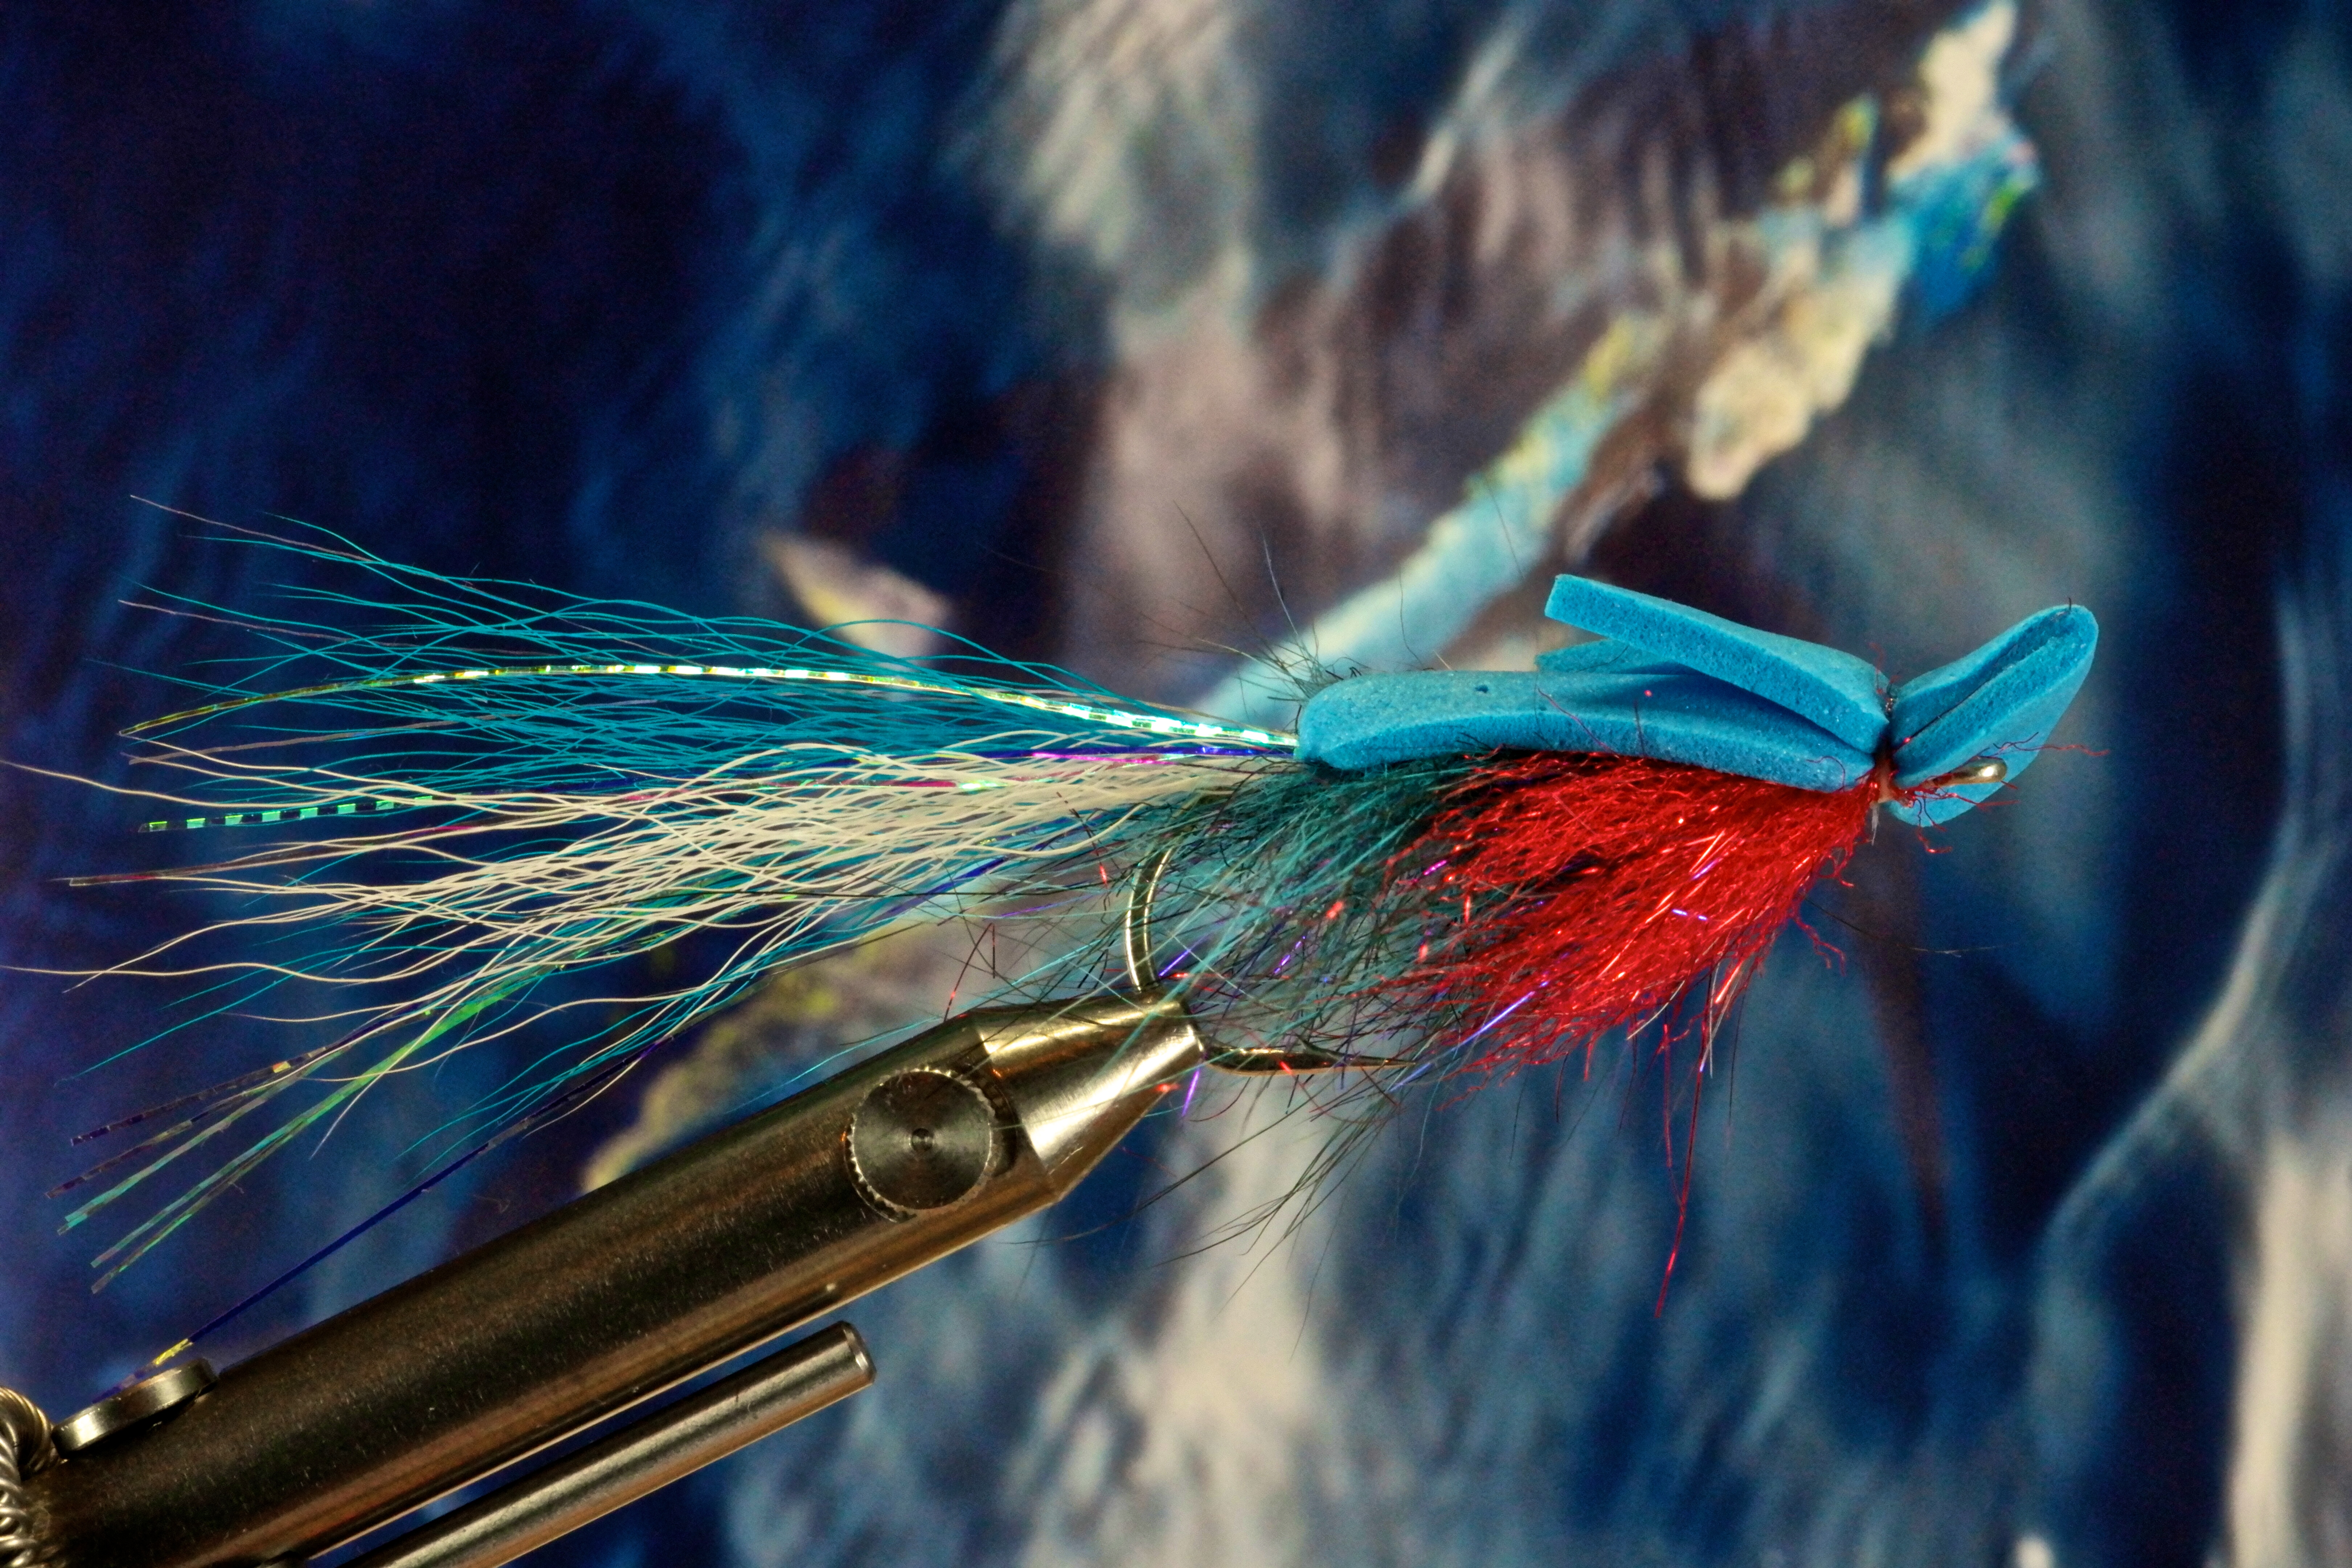 Jay\'s - Jay | Flies Fishing With - Life and